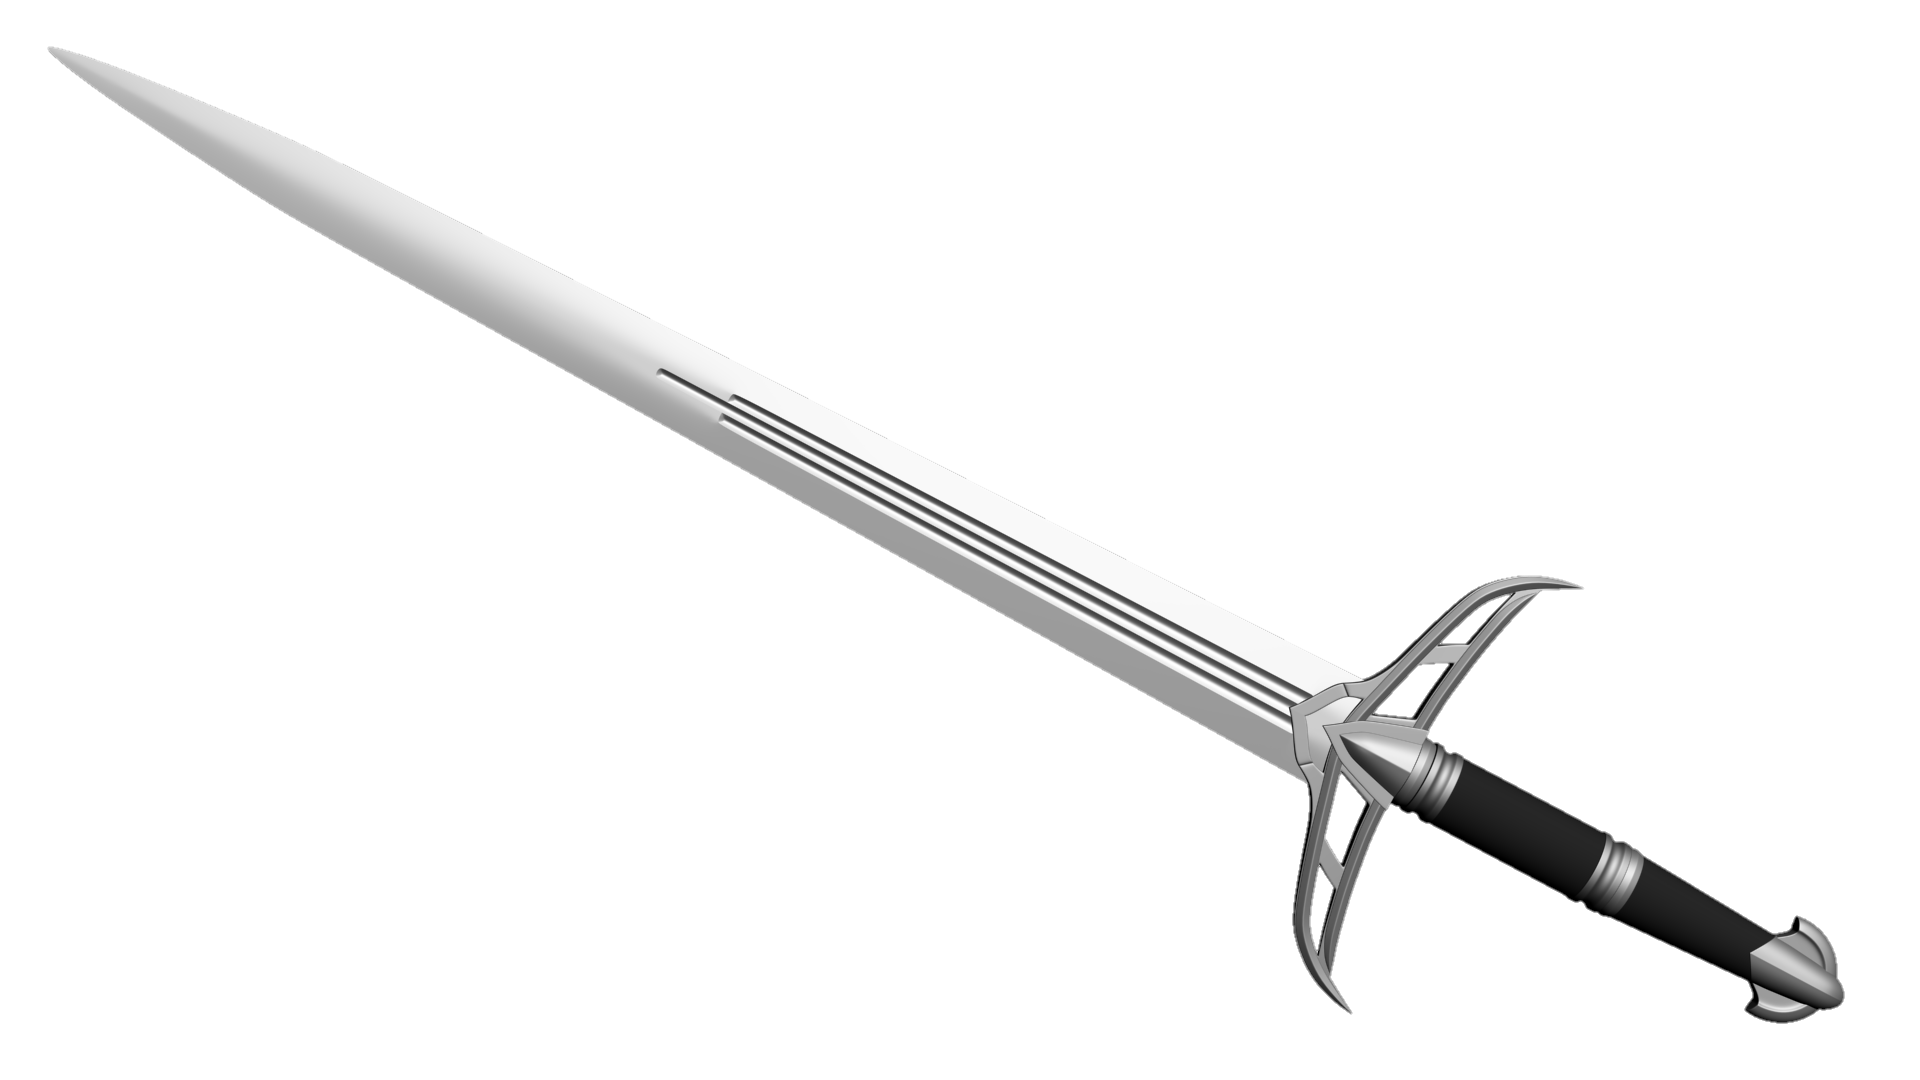 sword-png-from-pngfre-4